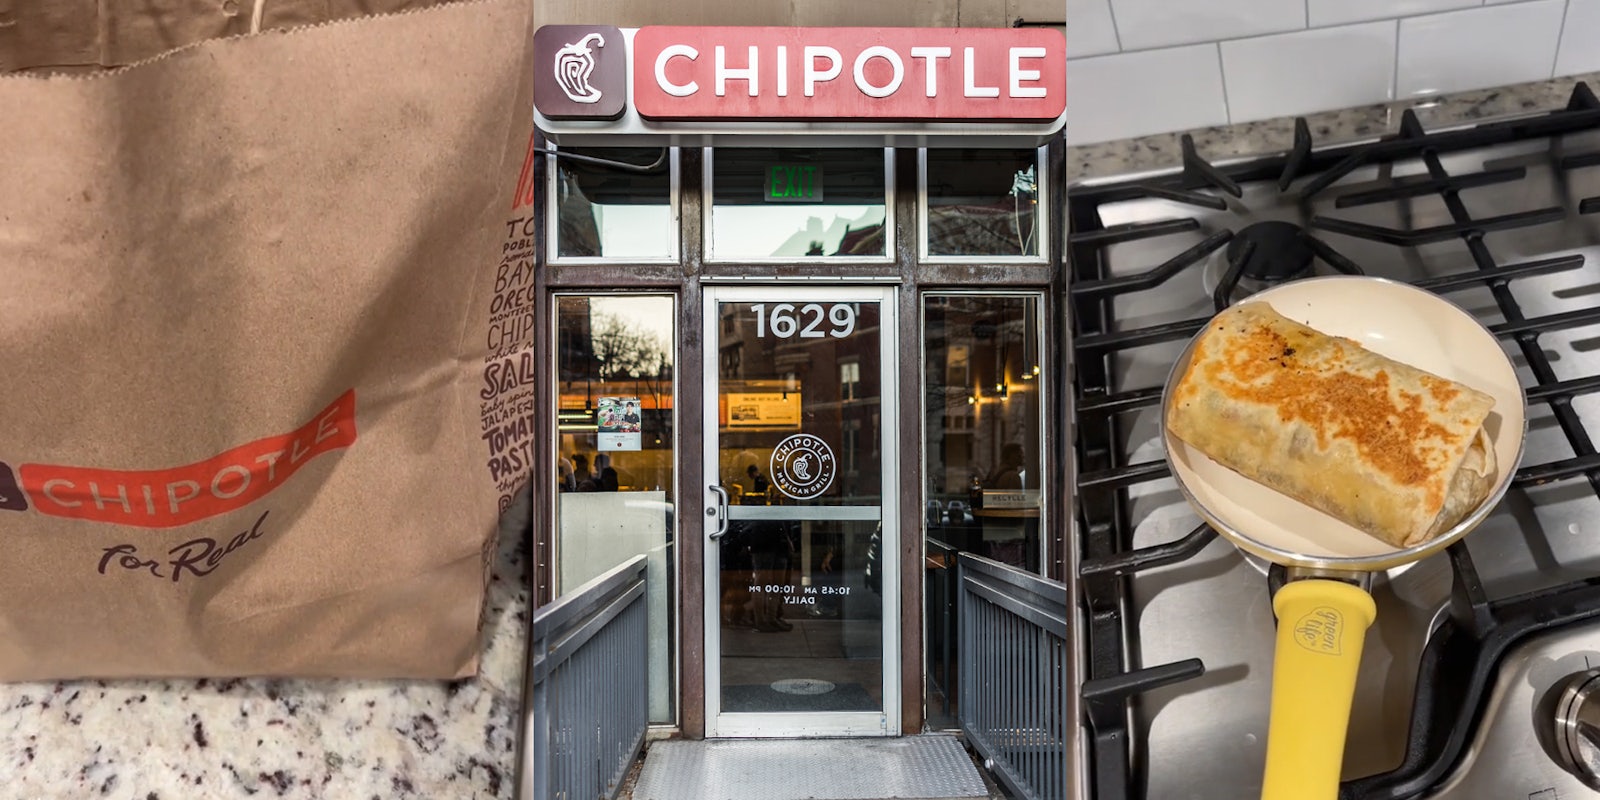 paper bag from Chipotle on counter (l) Chipotle sign above glass door (c) quesadilla in pan on stove (r)